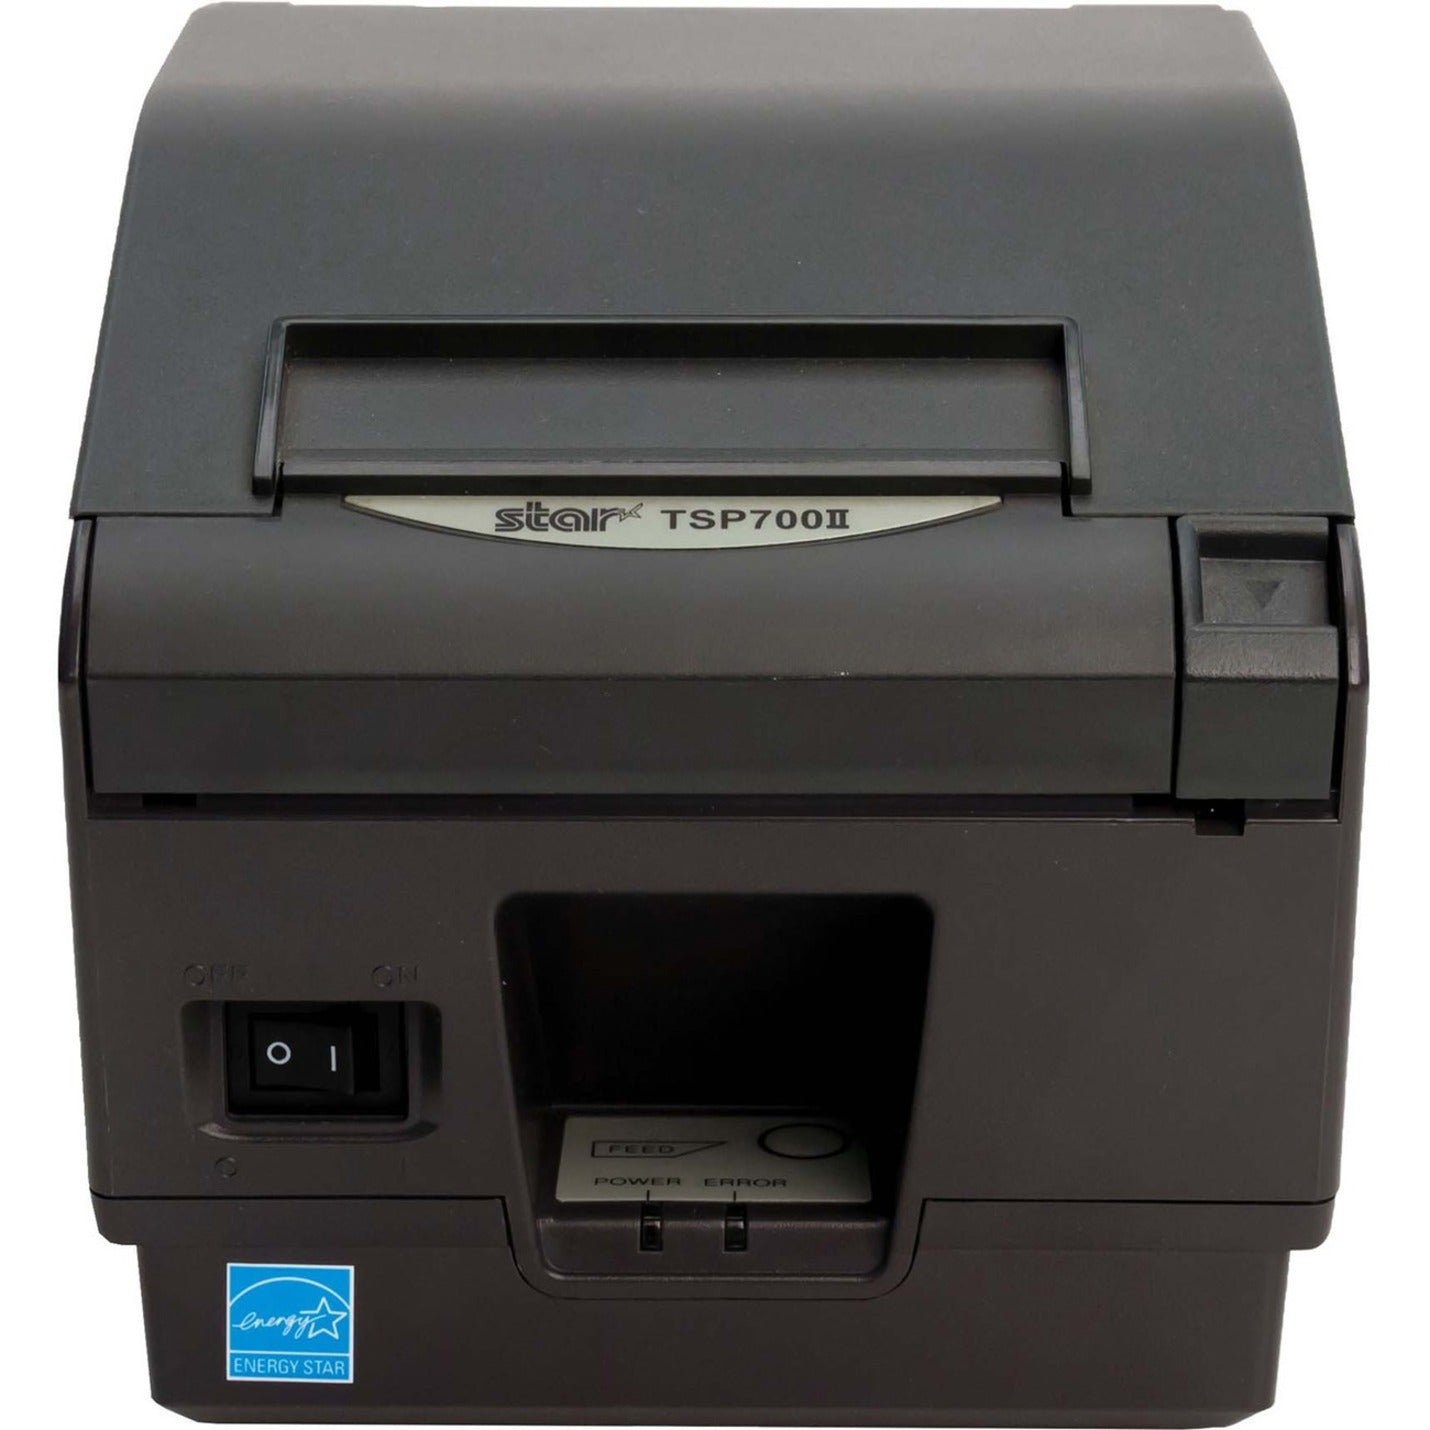 Star Micronics 39442210 TSP743IIC GRY POS Thermal Label Printer, 2-Color Capable, Automatic Cutter